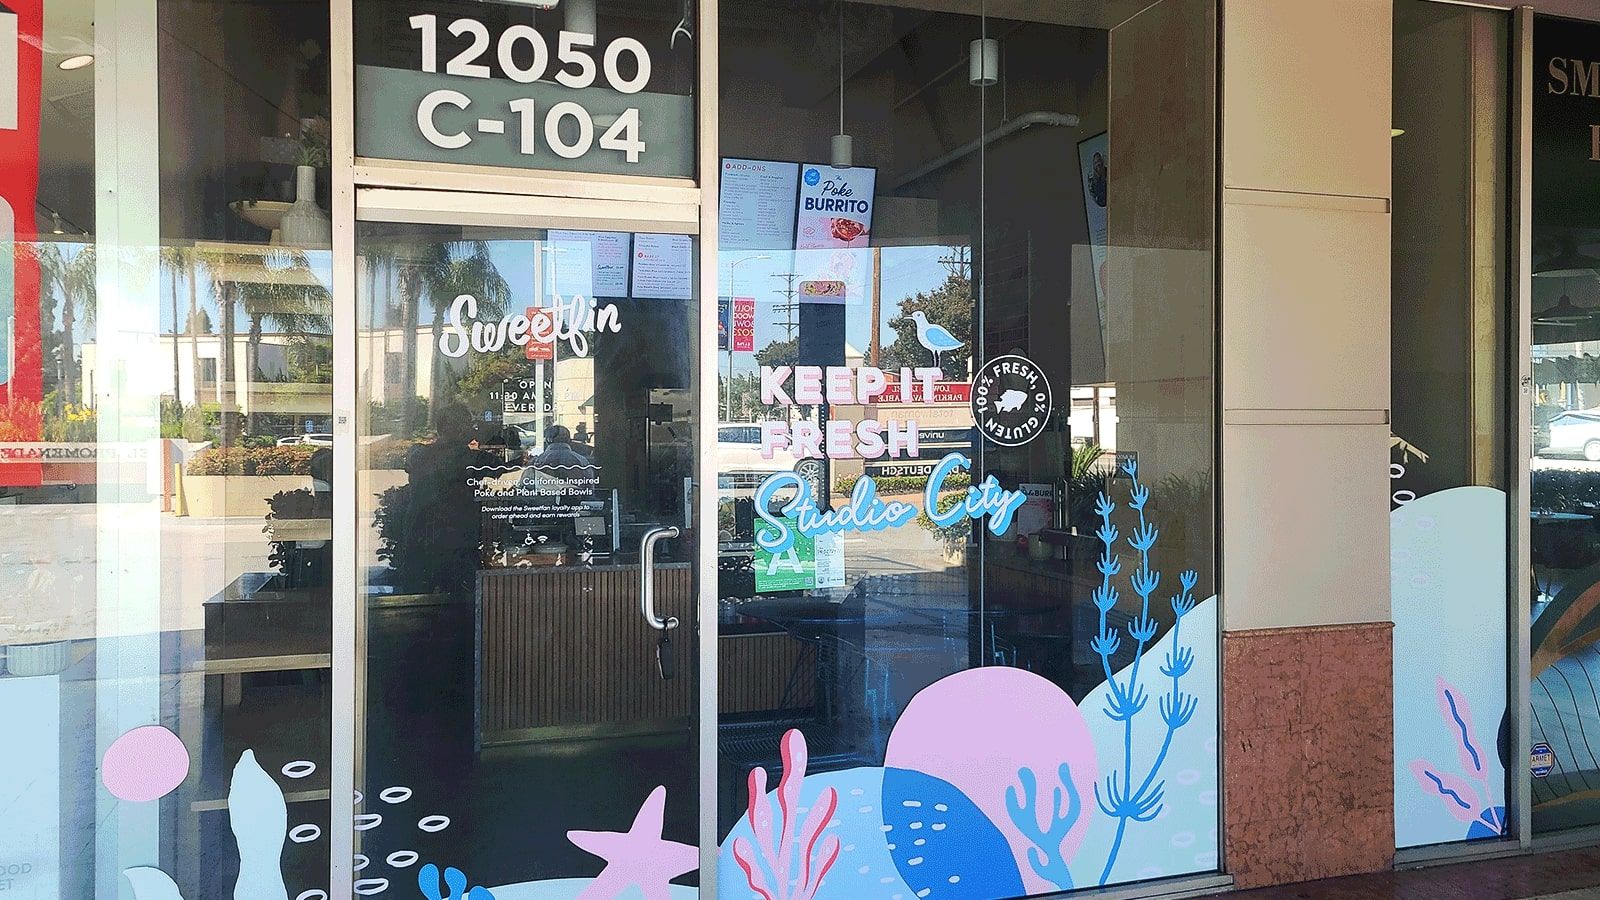 Eye-catching window decals attached to the storefront